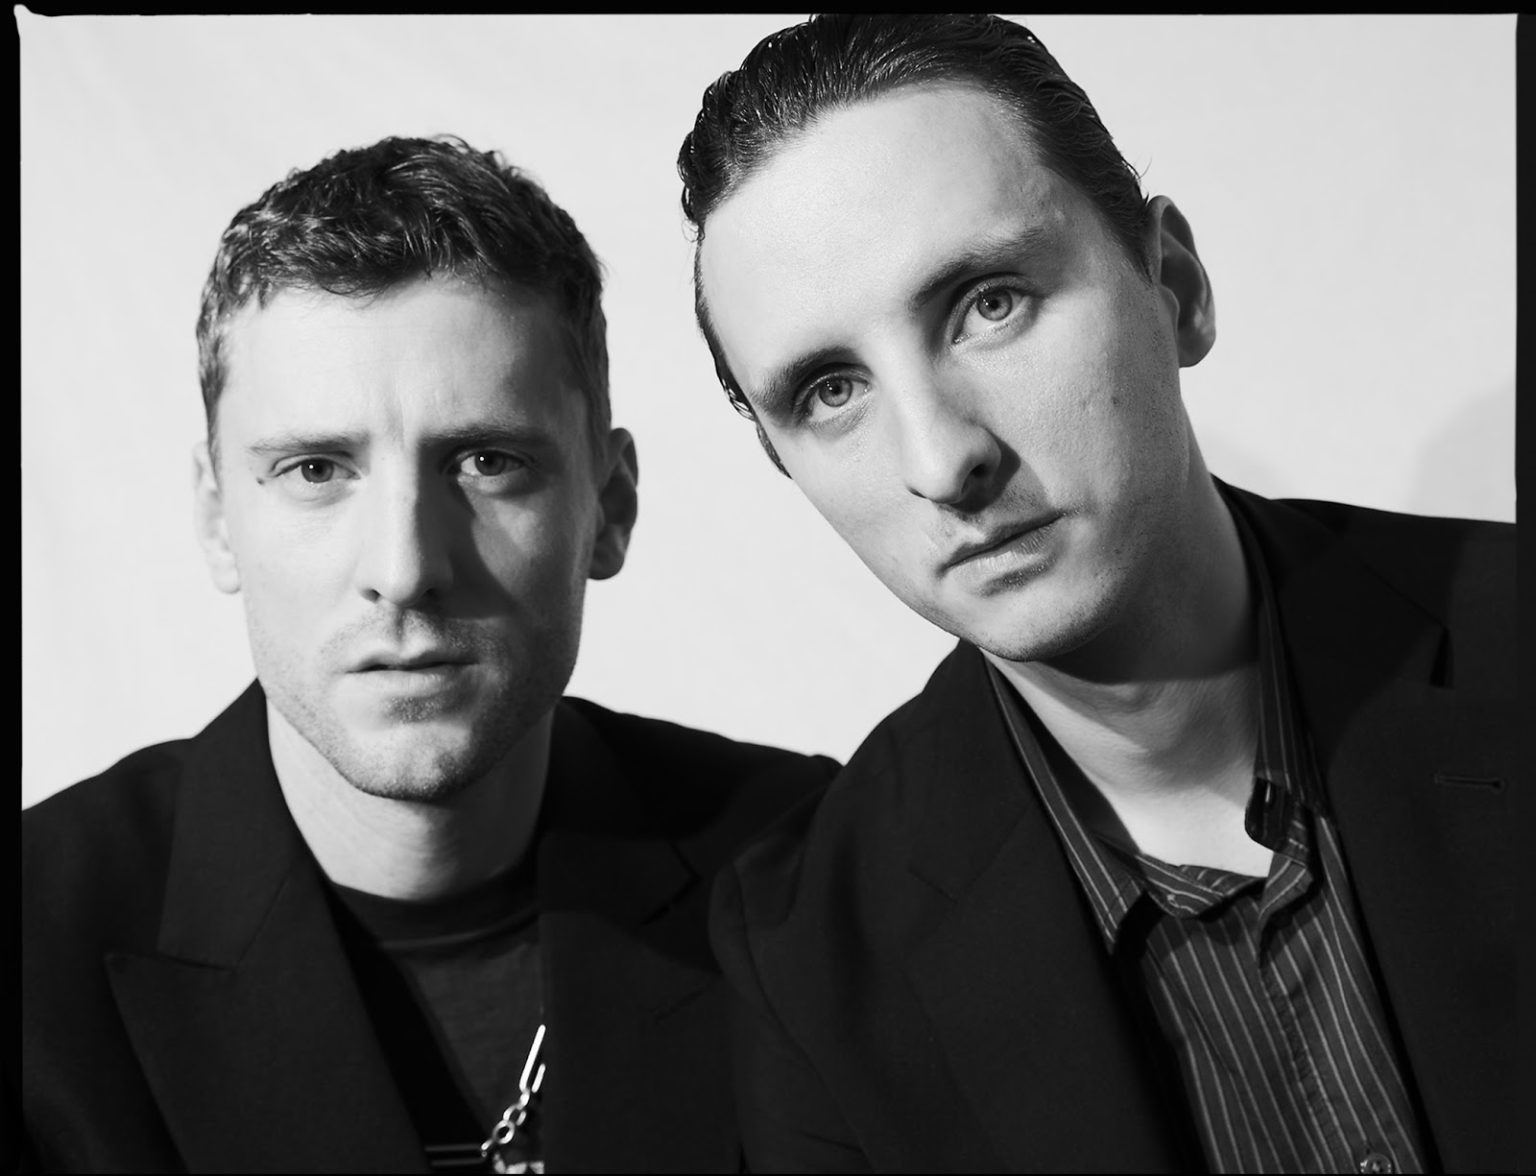 These New Puritans, have announce the release of The Cut